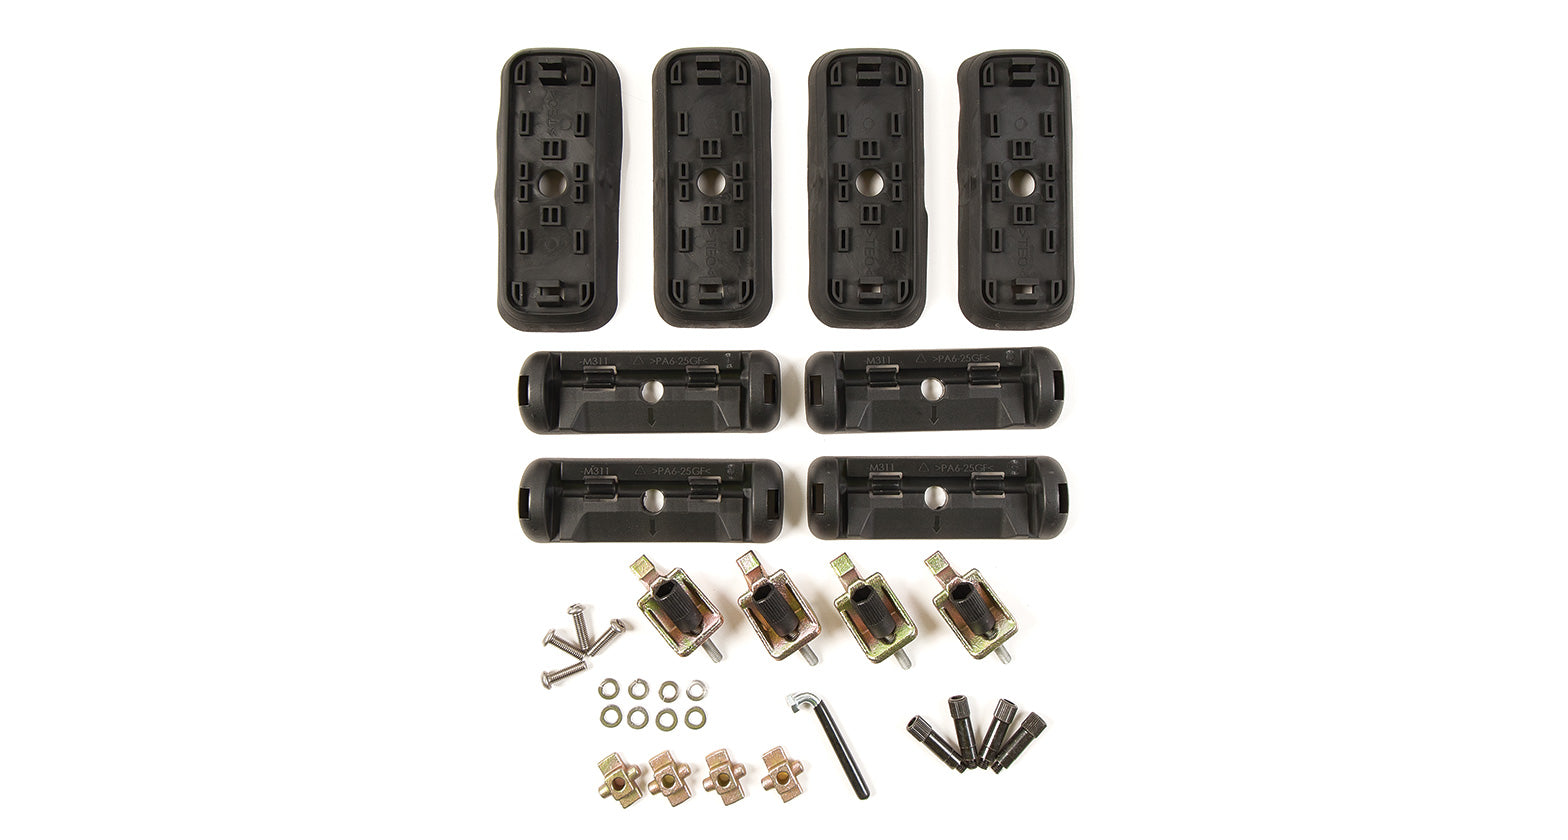 FIXED POINT KIT FOR RHINO 2500 MULTI FIT - DK292